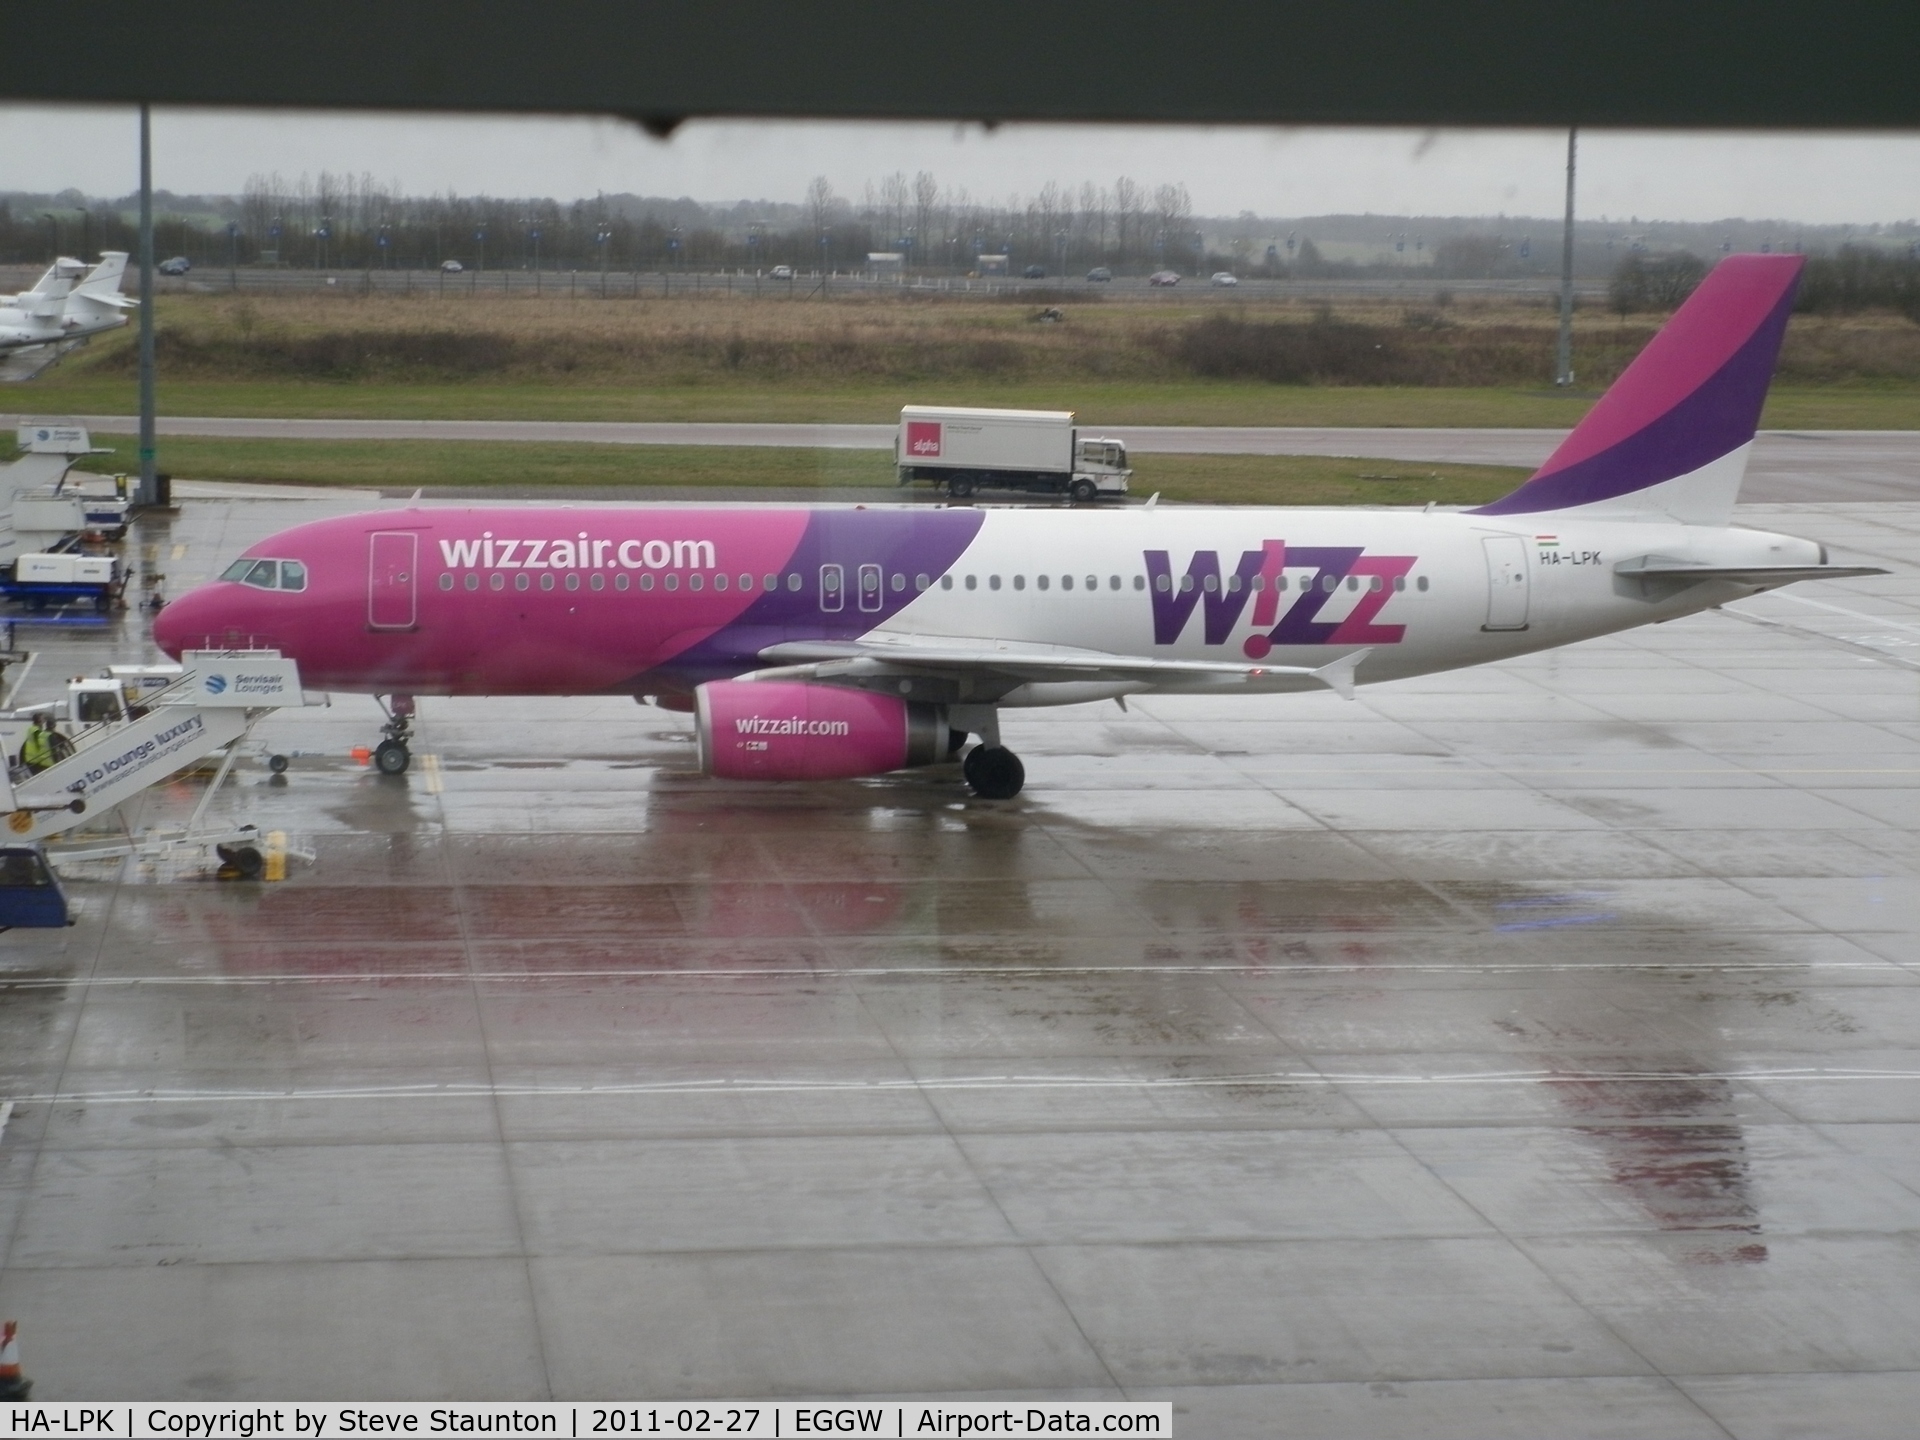 HA-LPK, 2007 Airbus A320-232 C/N 3143, Taken on a wet February morning at Luton whilst waiting to fly to Cyprus